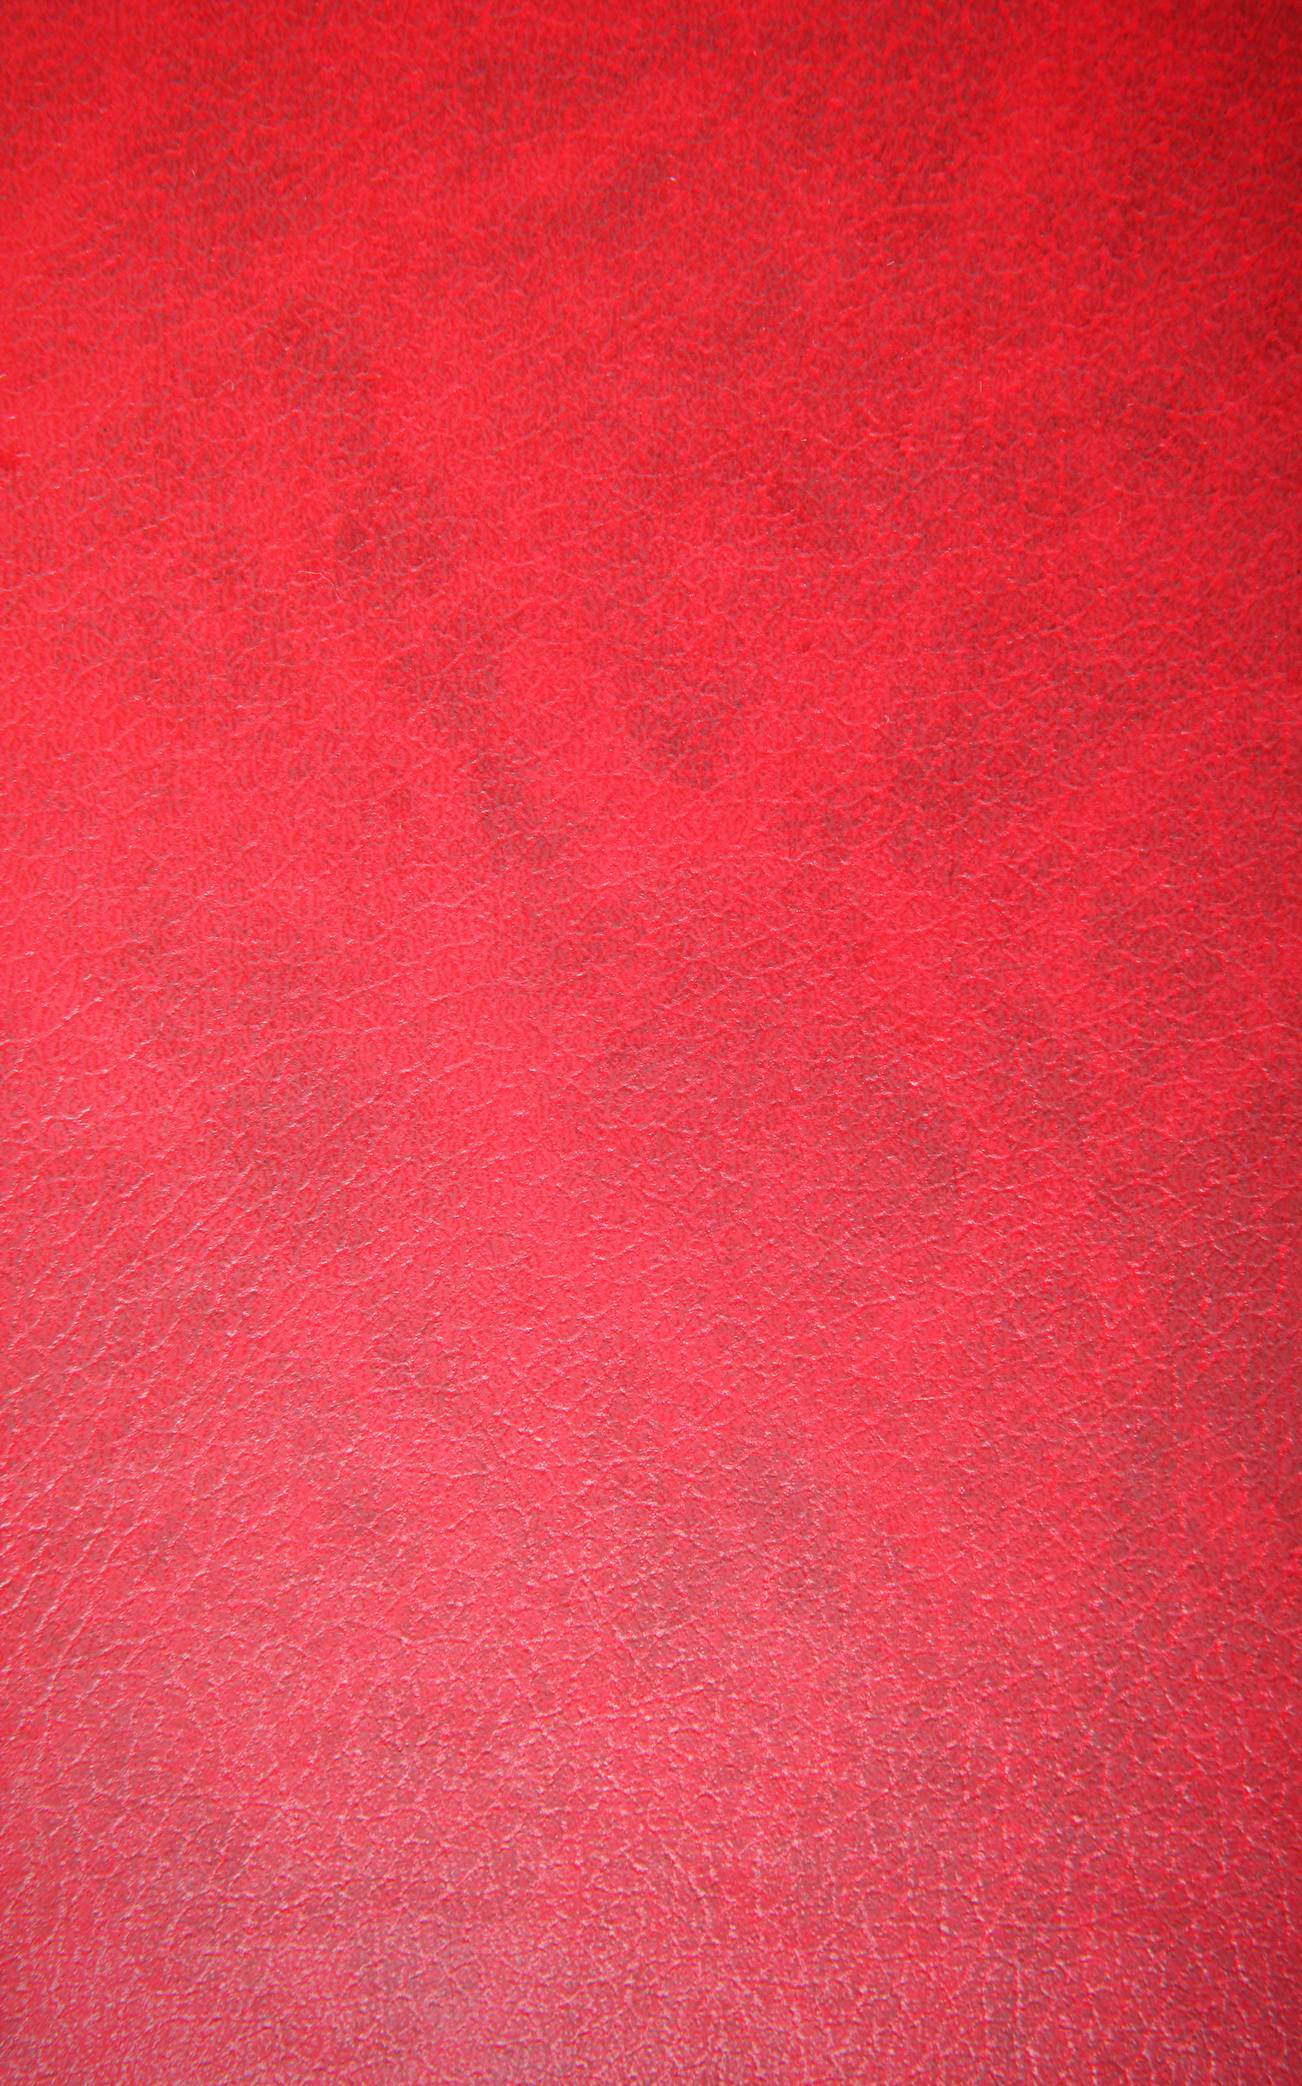 Red background, Detail, Material, Purple, Red, HQ Photo